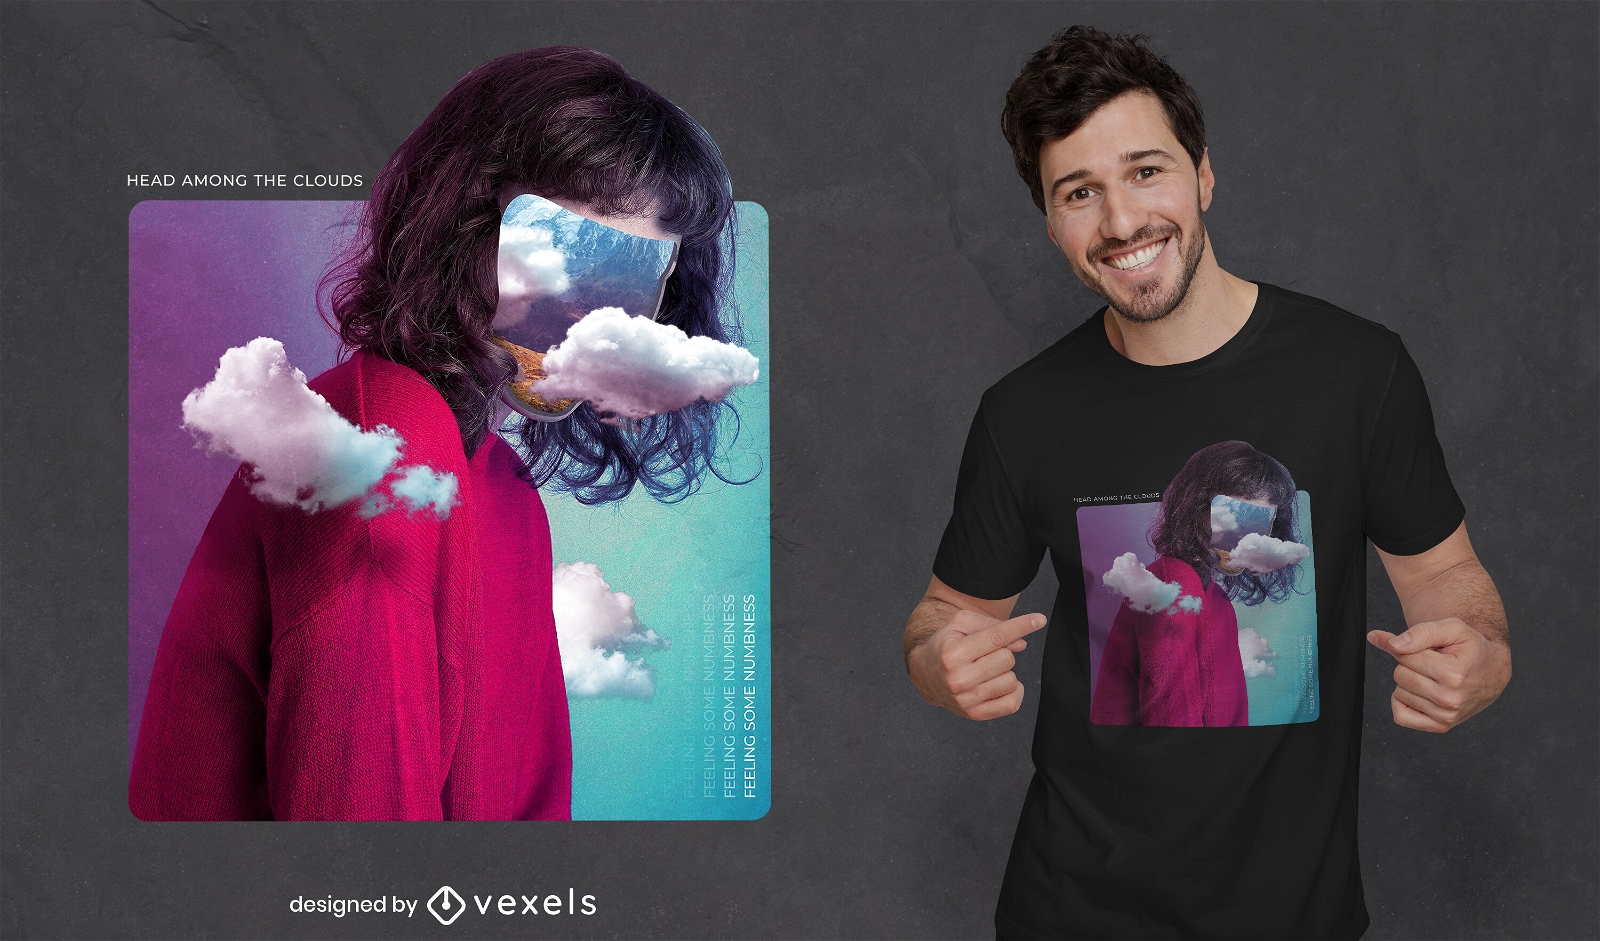 Camiseta mujer con nubes collage psd